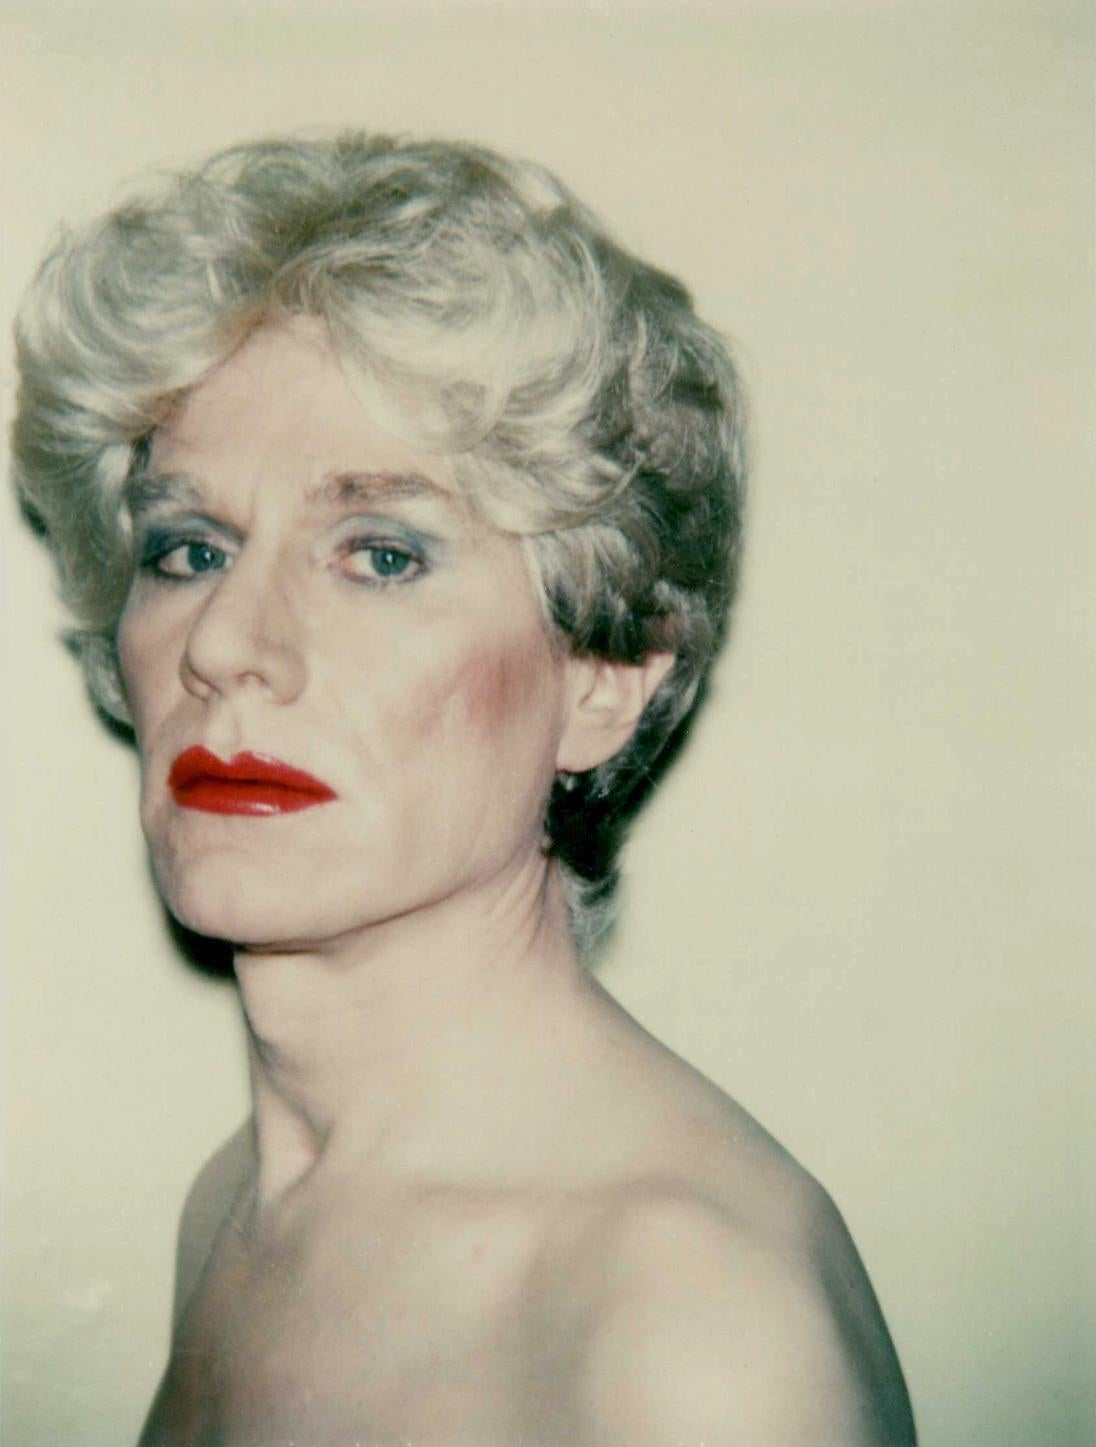 Self-Portrait in Drag - Photograph by Andy Warhol